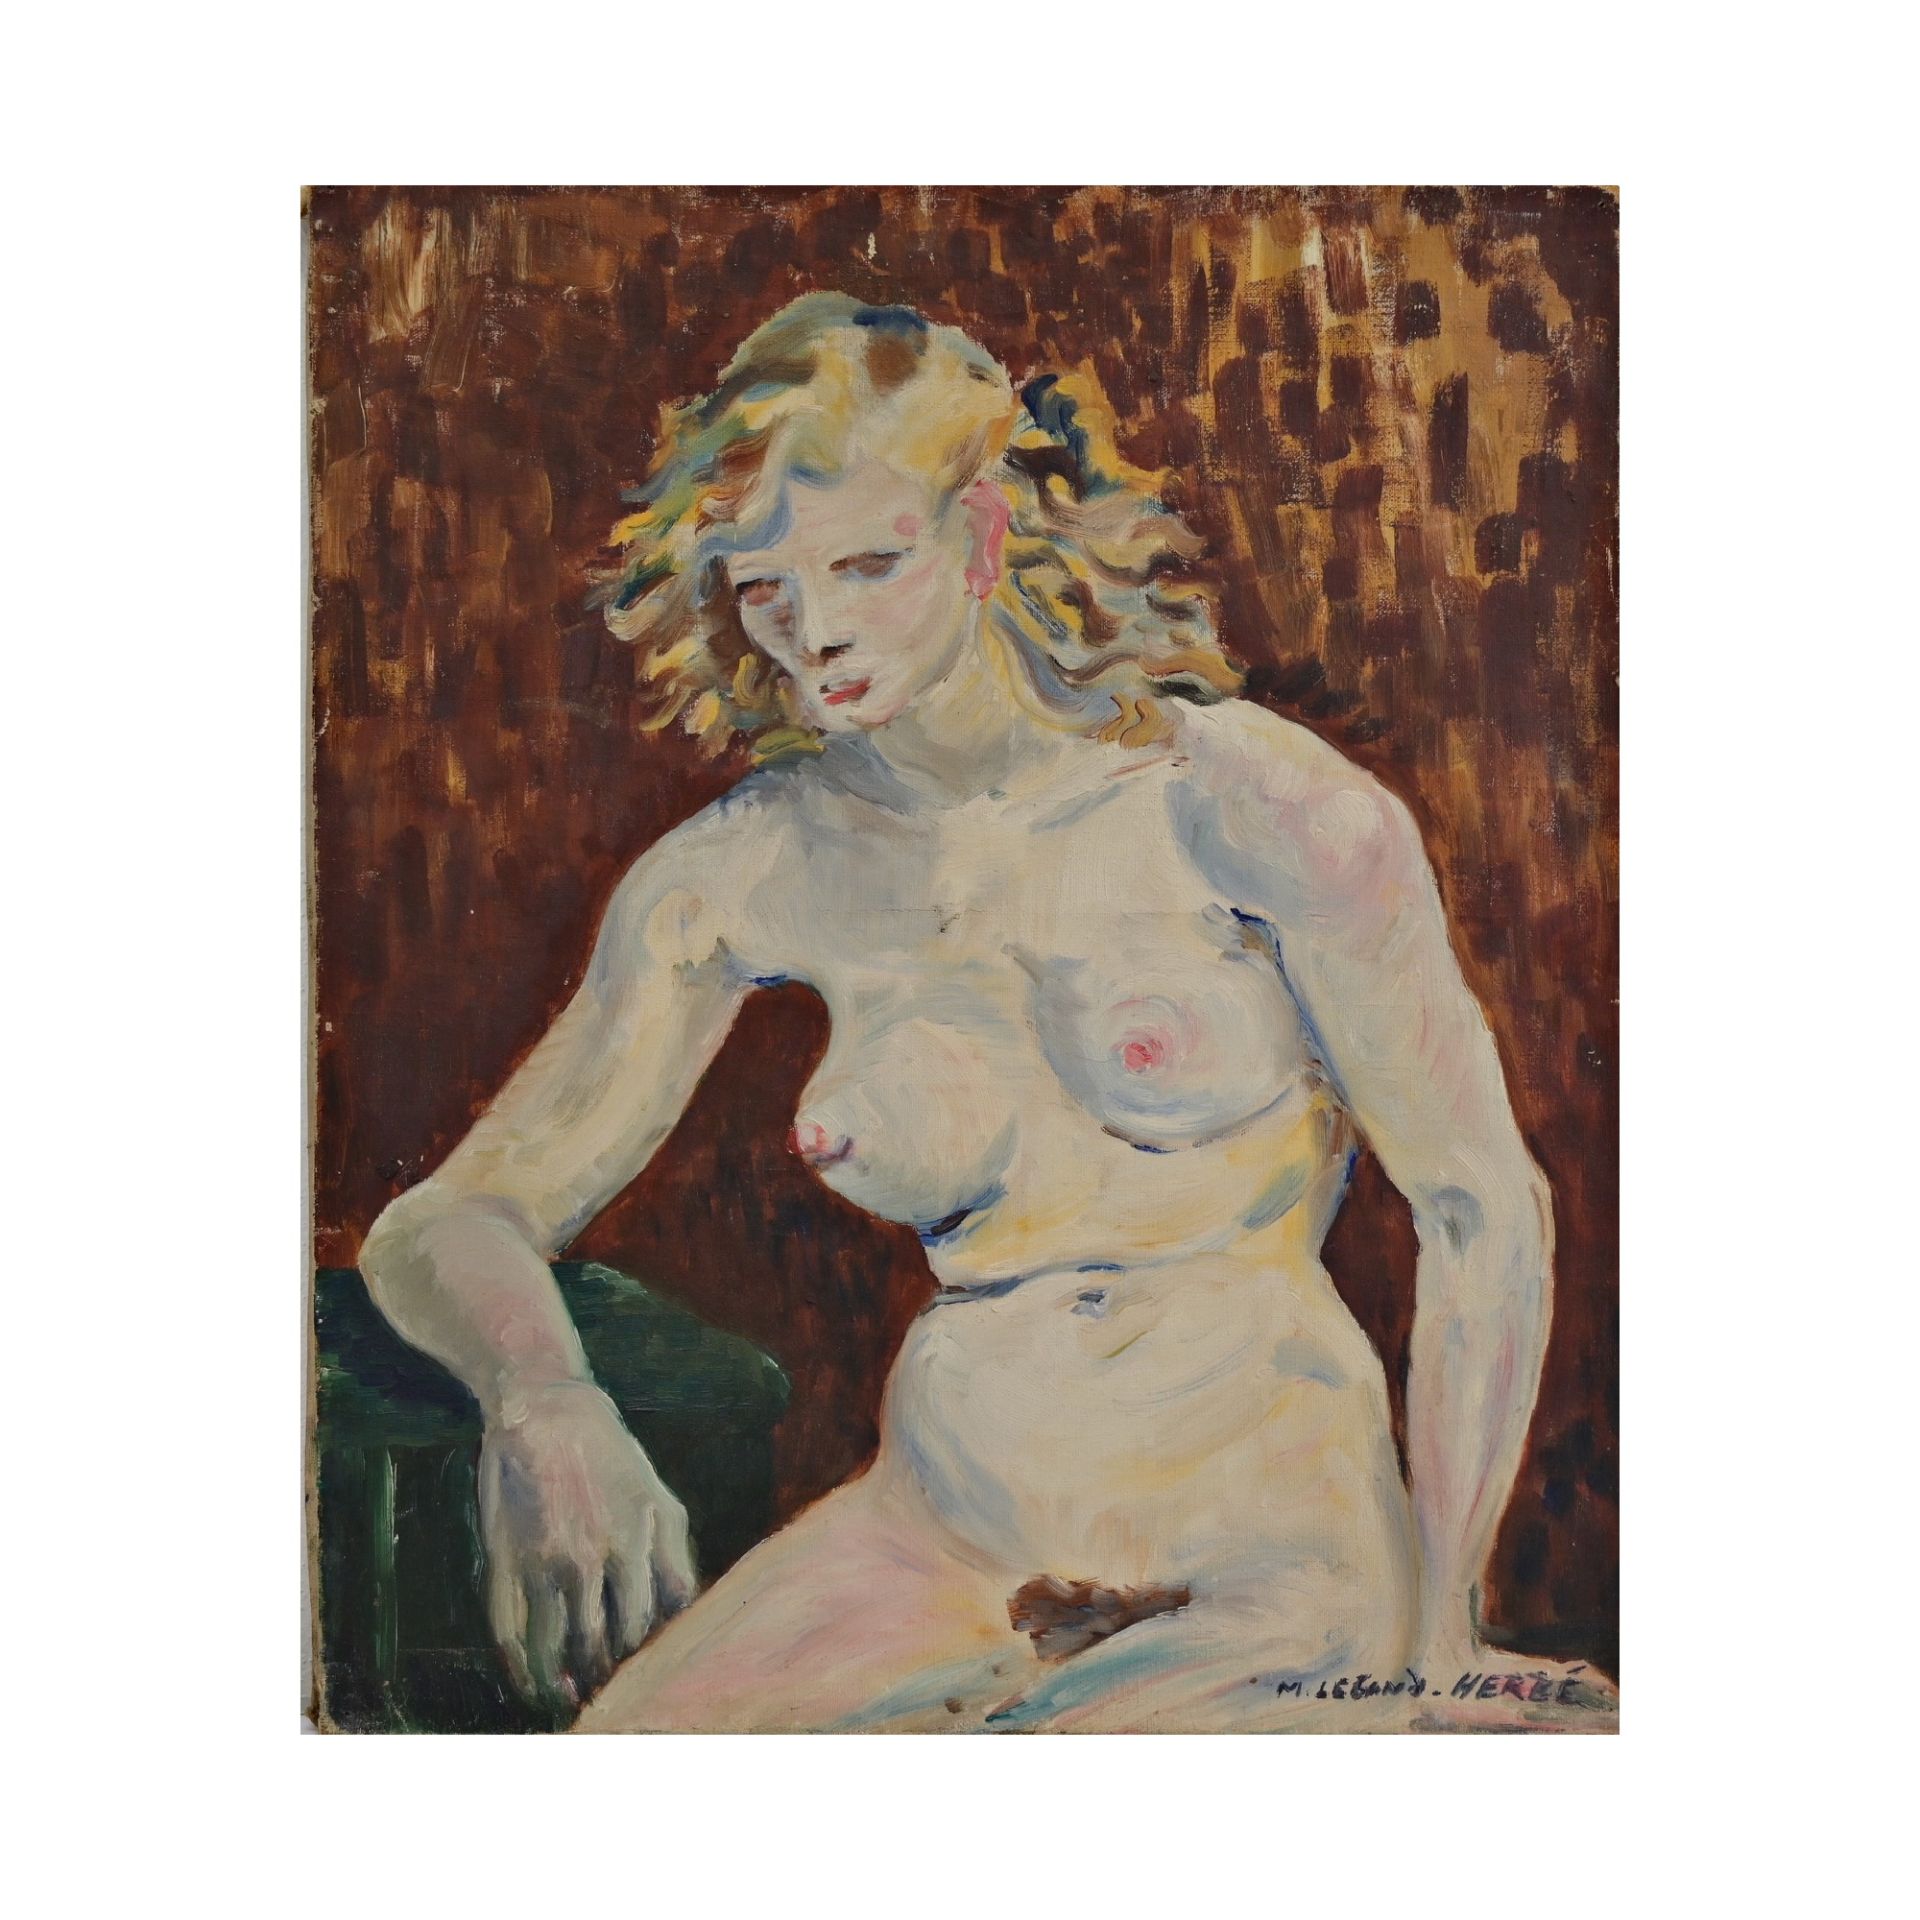 "Seated female nude", oil on canvas, M. Legand Herle, French Painting of the 20th century.